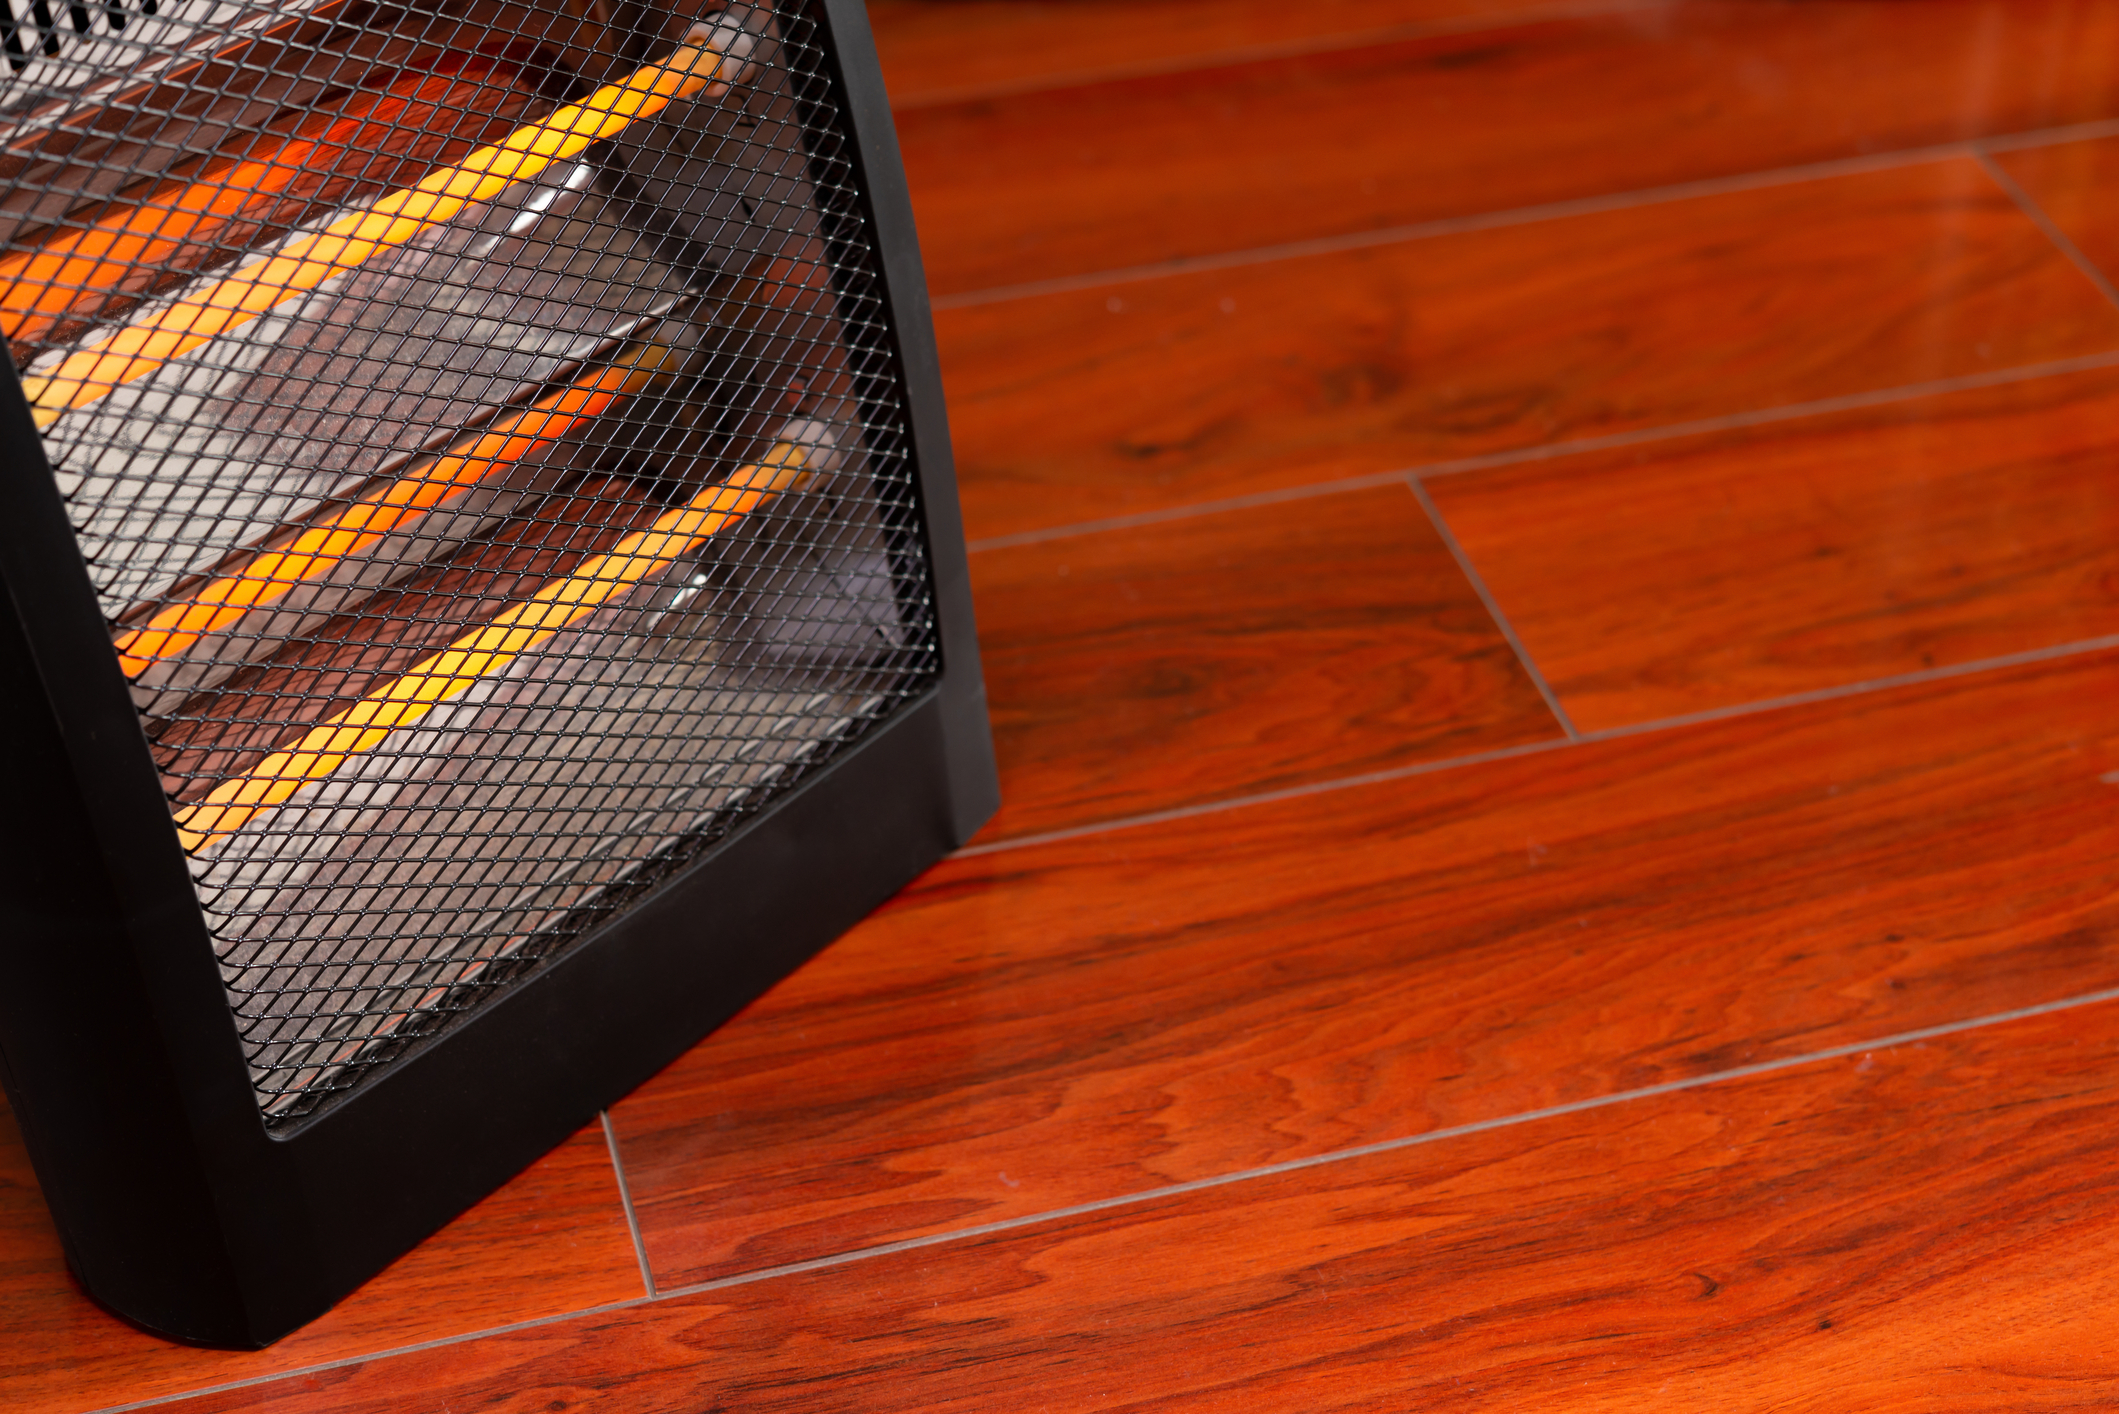 A space heater sits on the floor.